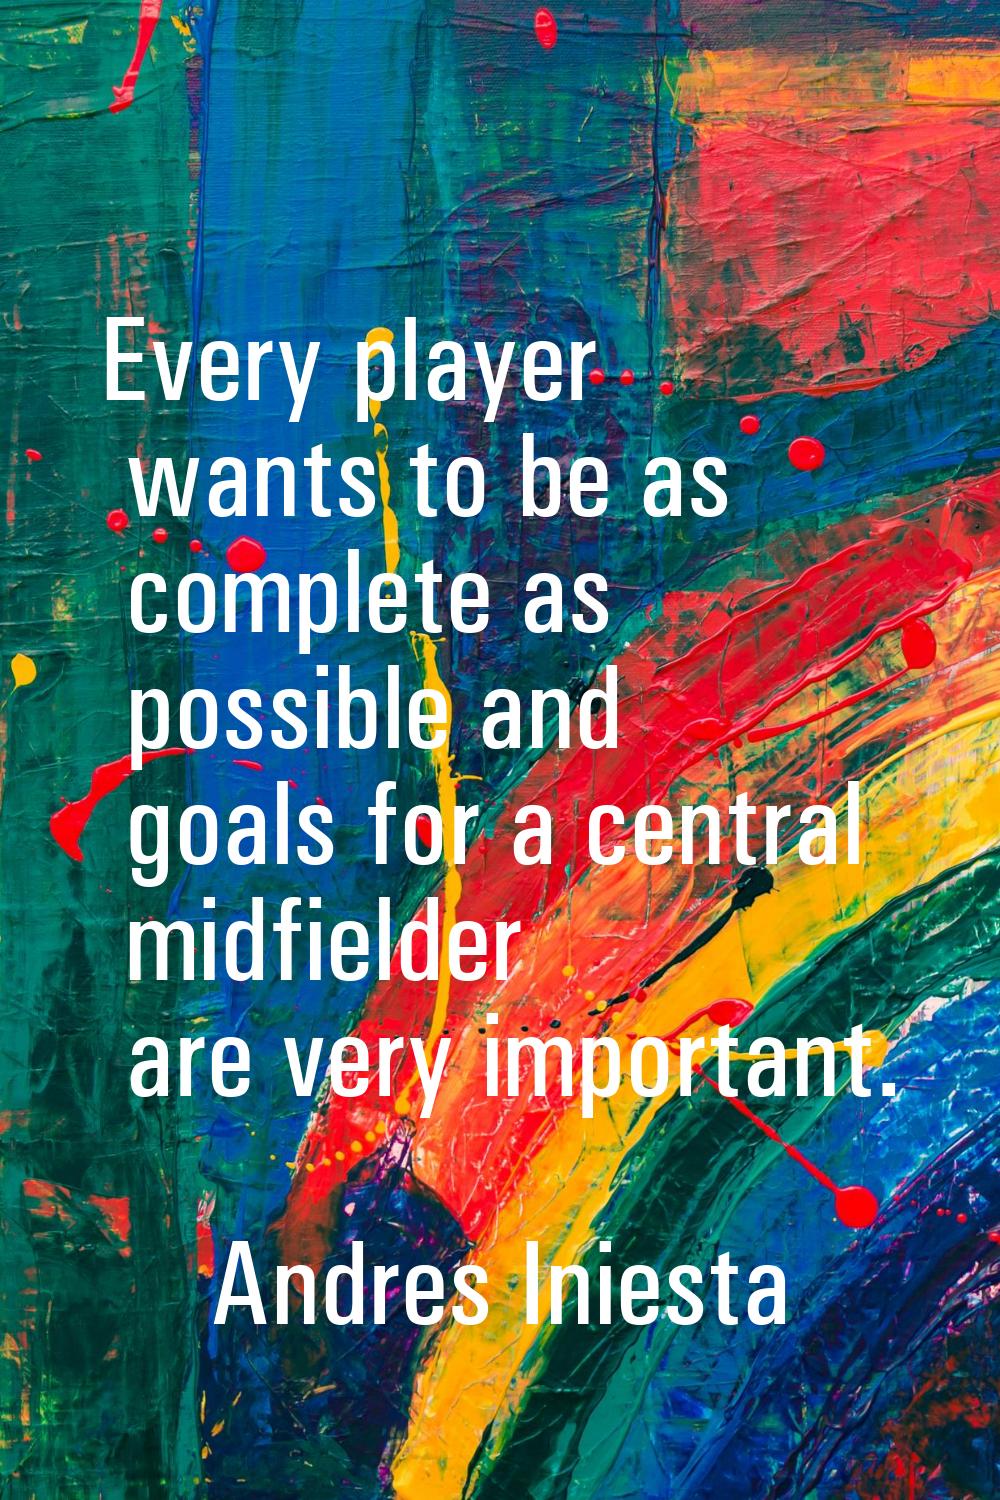 Every player wants to be as complete as possible and goals for a central midfielder are very import